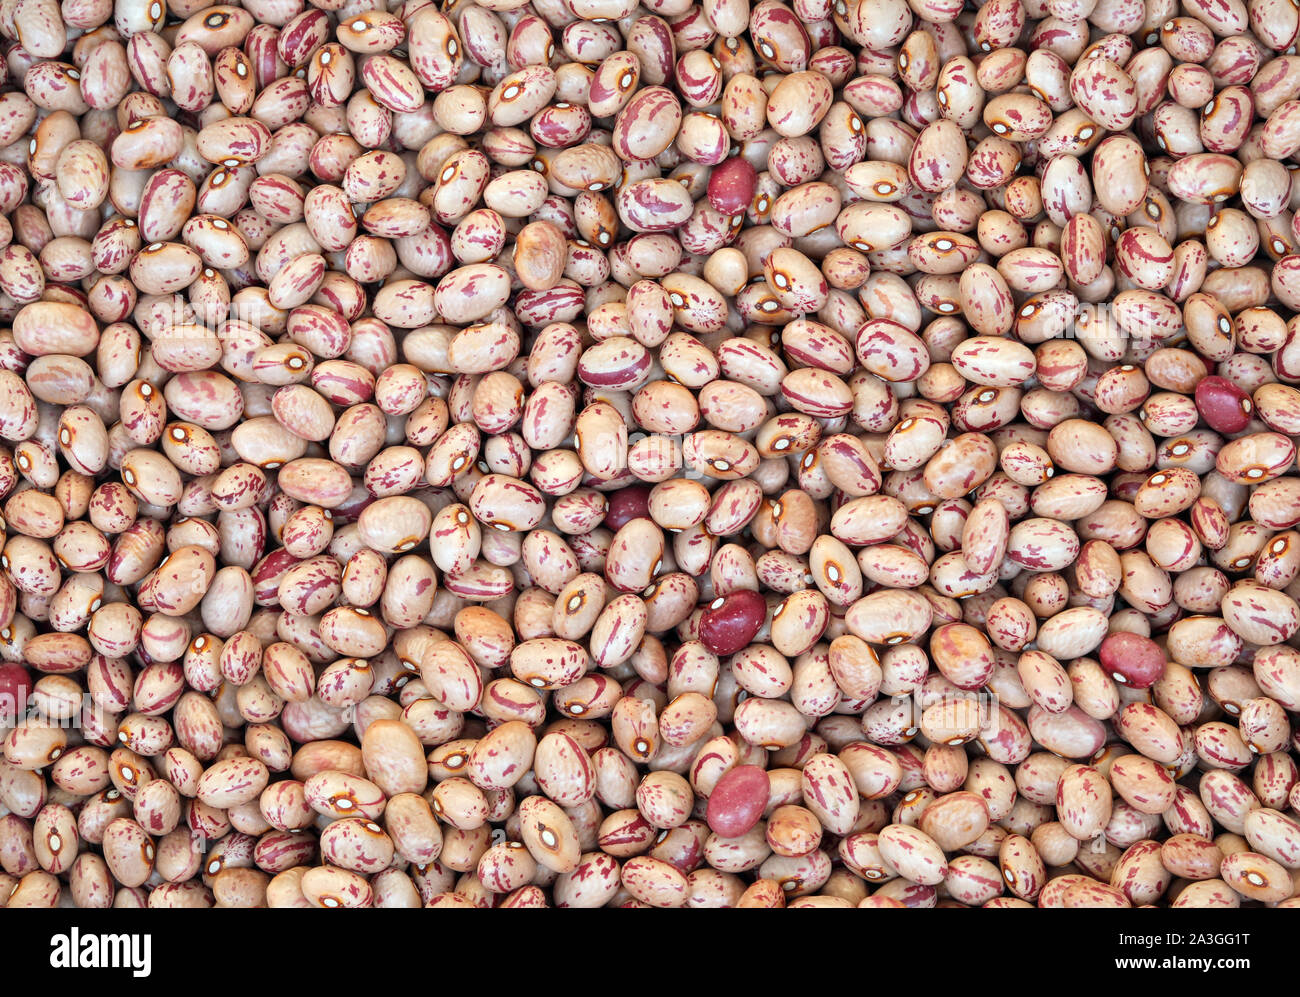 background of many dried beans Stock Photo